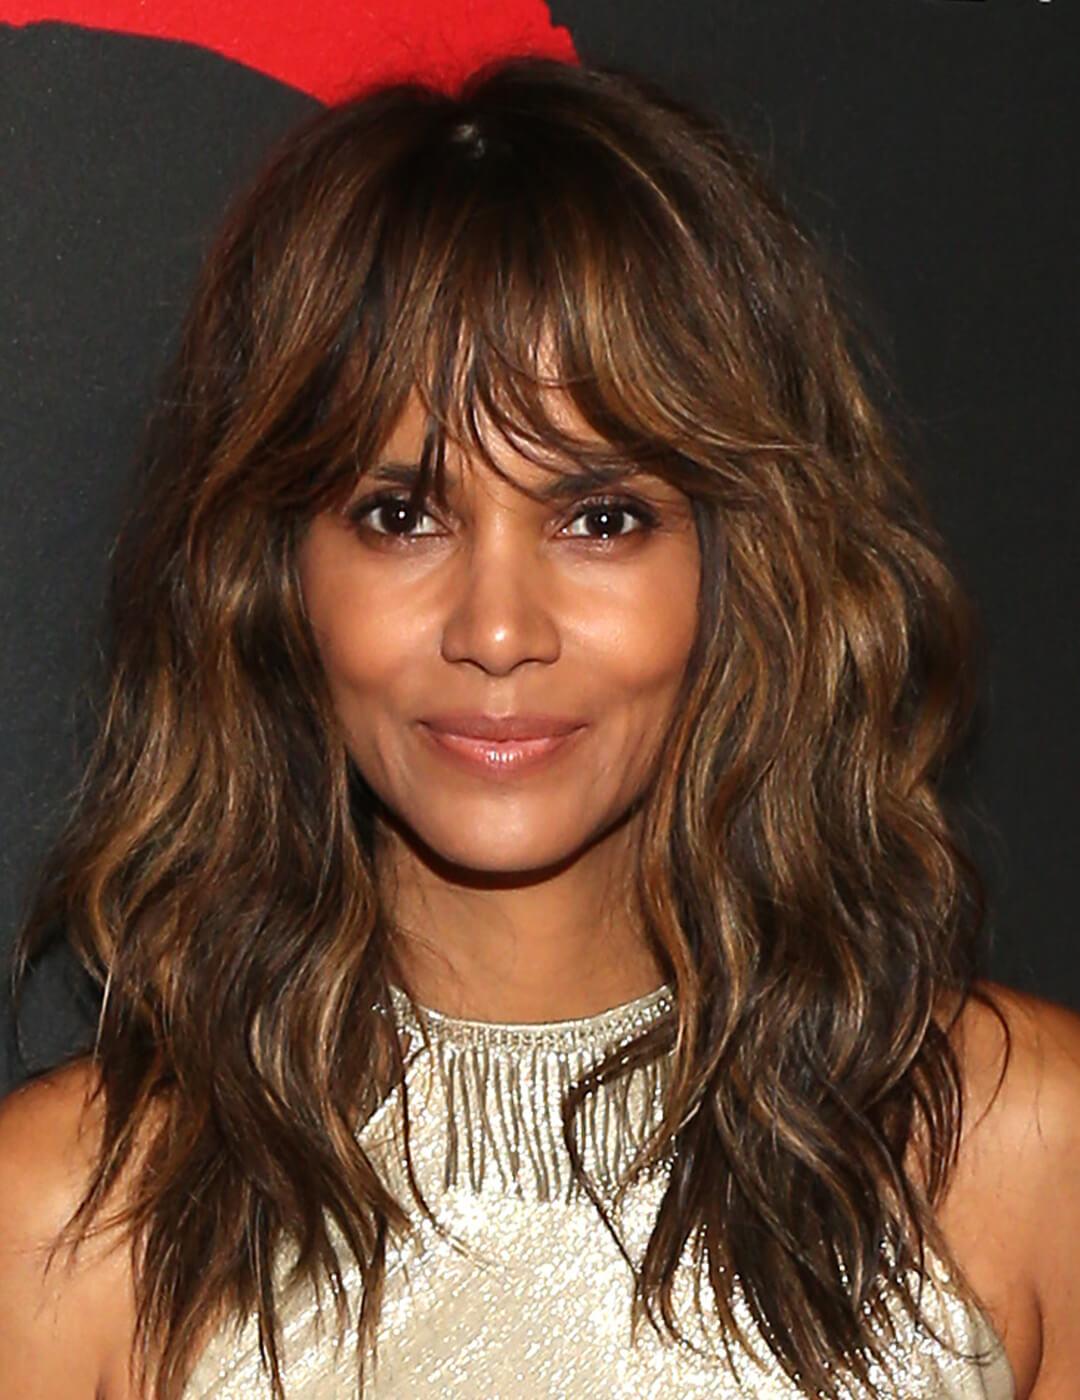 Halle Berry looking chic with a wavy hairstyle and silver dress